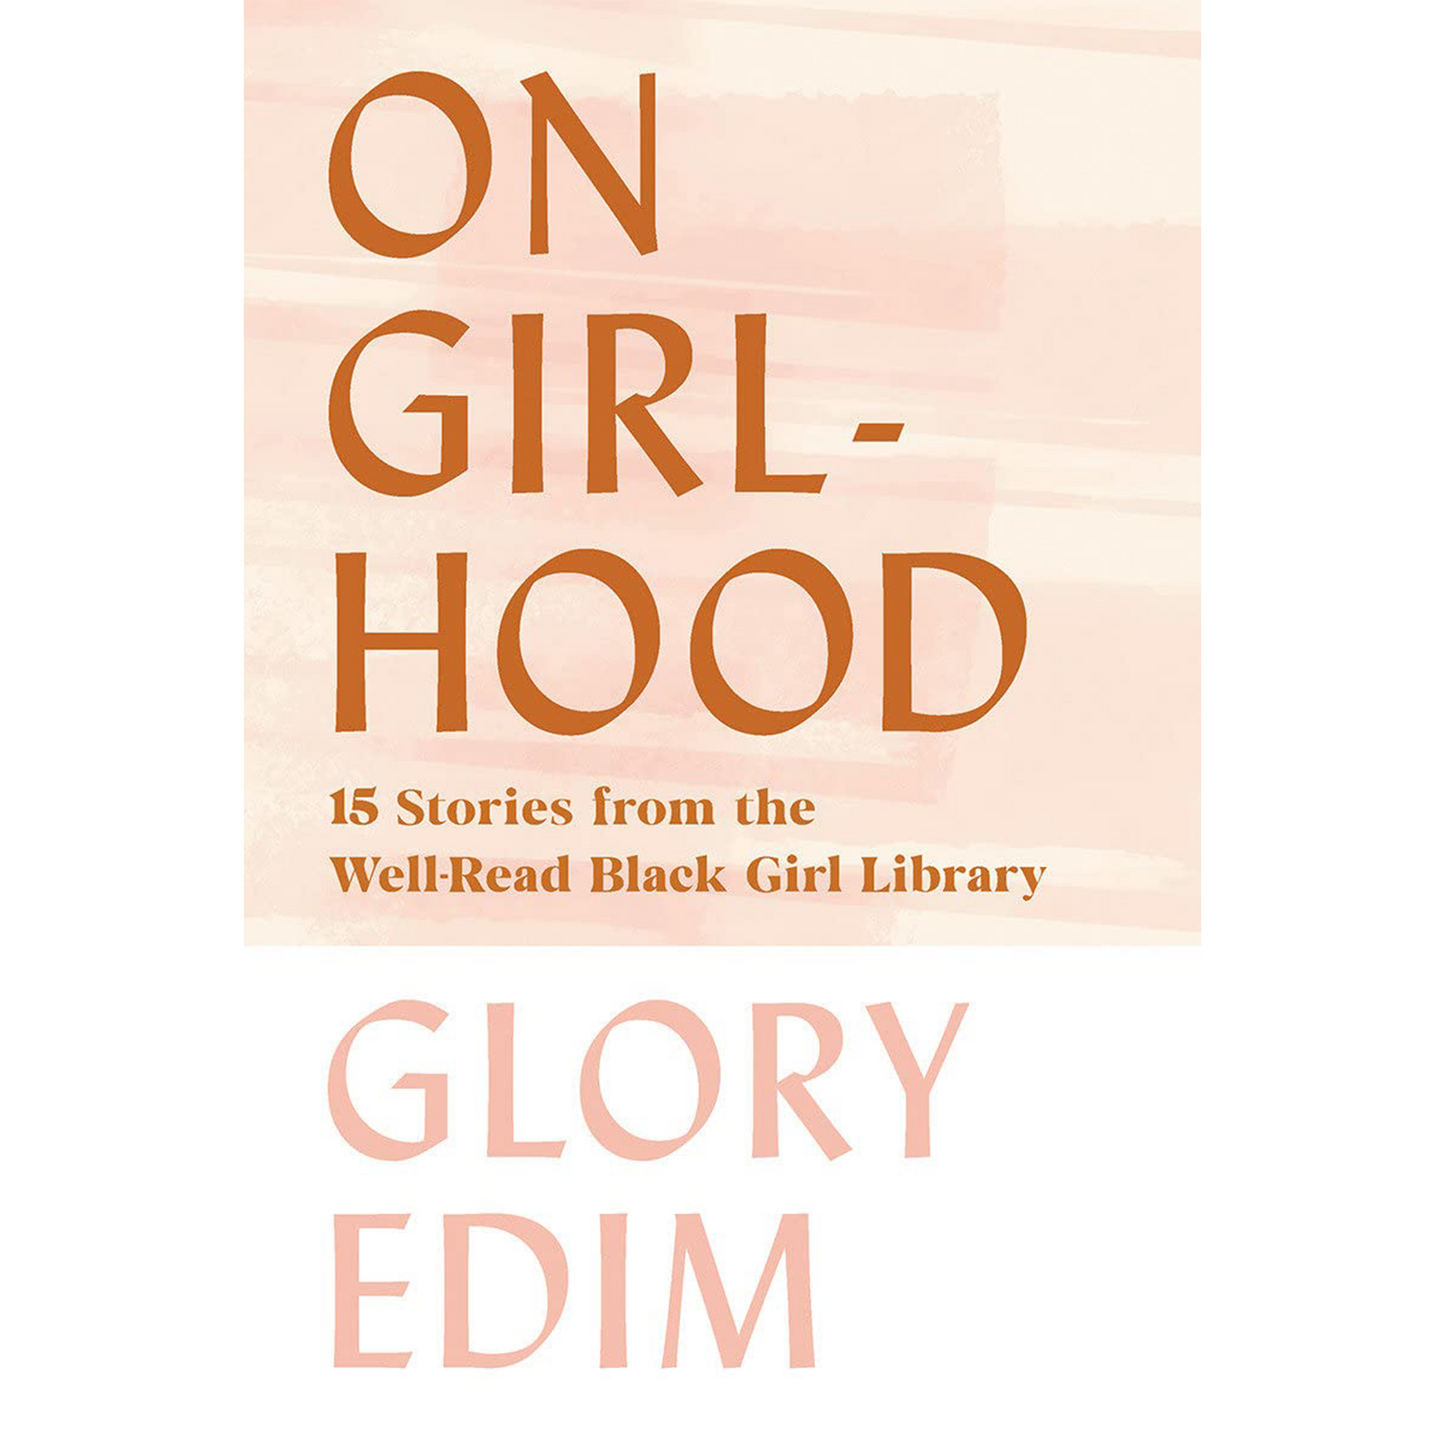 On Girlhood: 15 Stories from the Well-Read Black Girl Library Hardcover